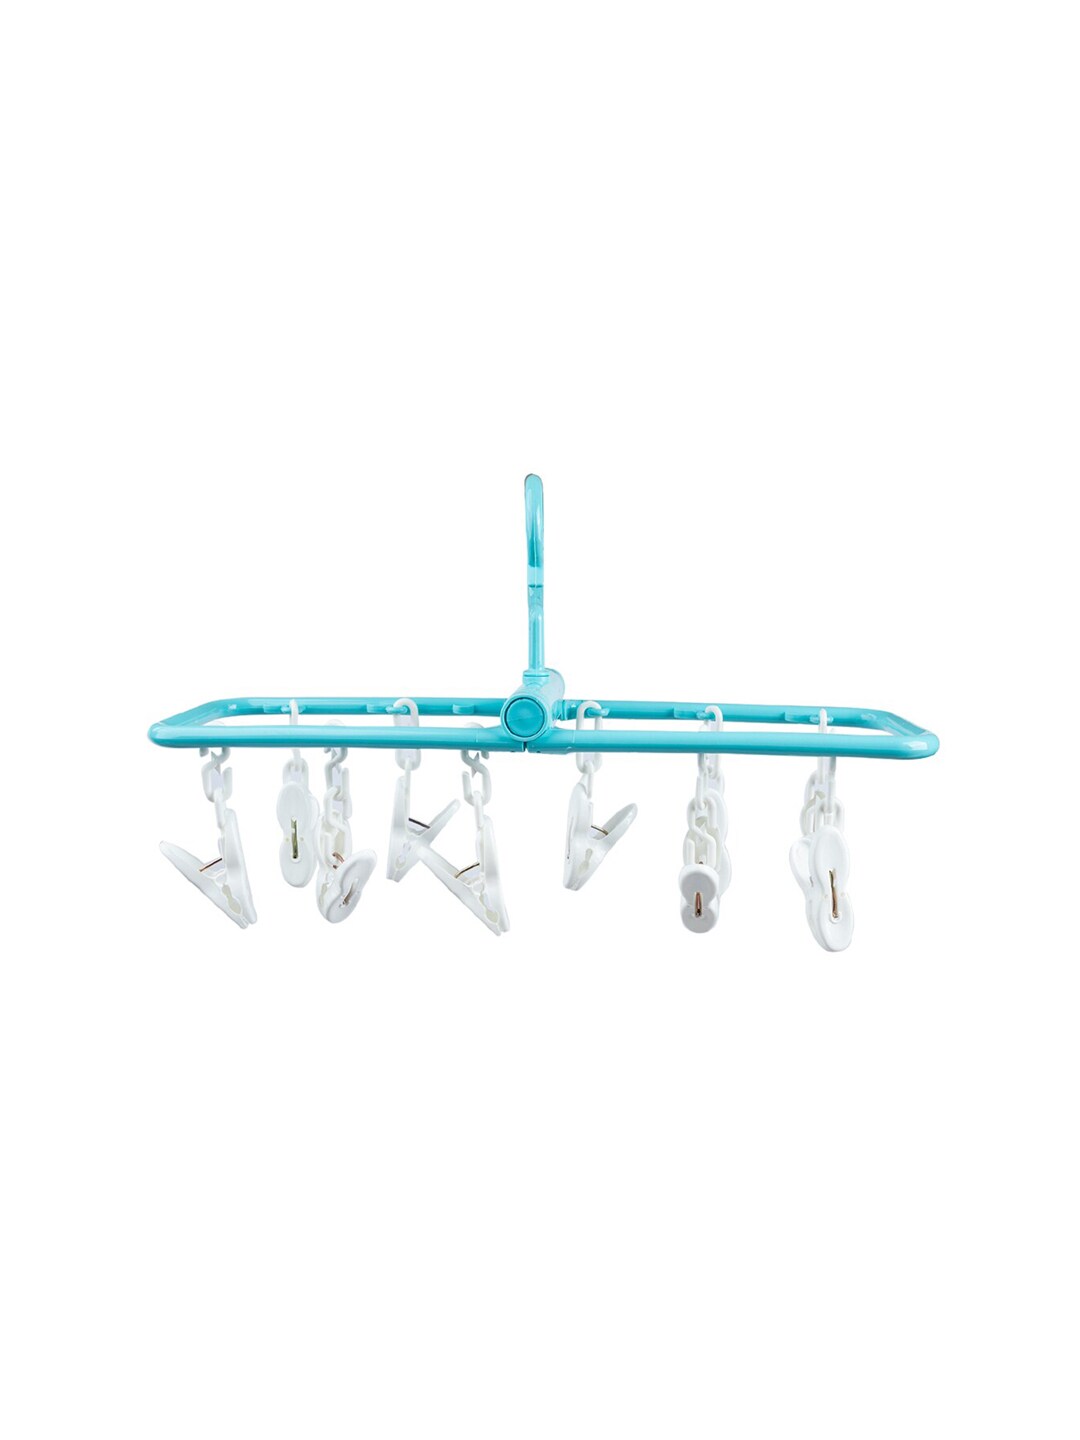 MARKET99 Blue Solid 12 Clips Cloth Hanger Price in India